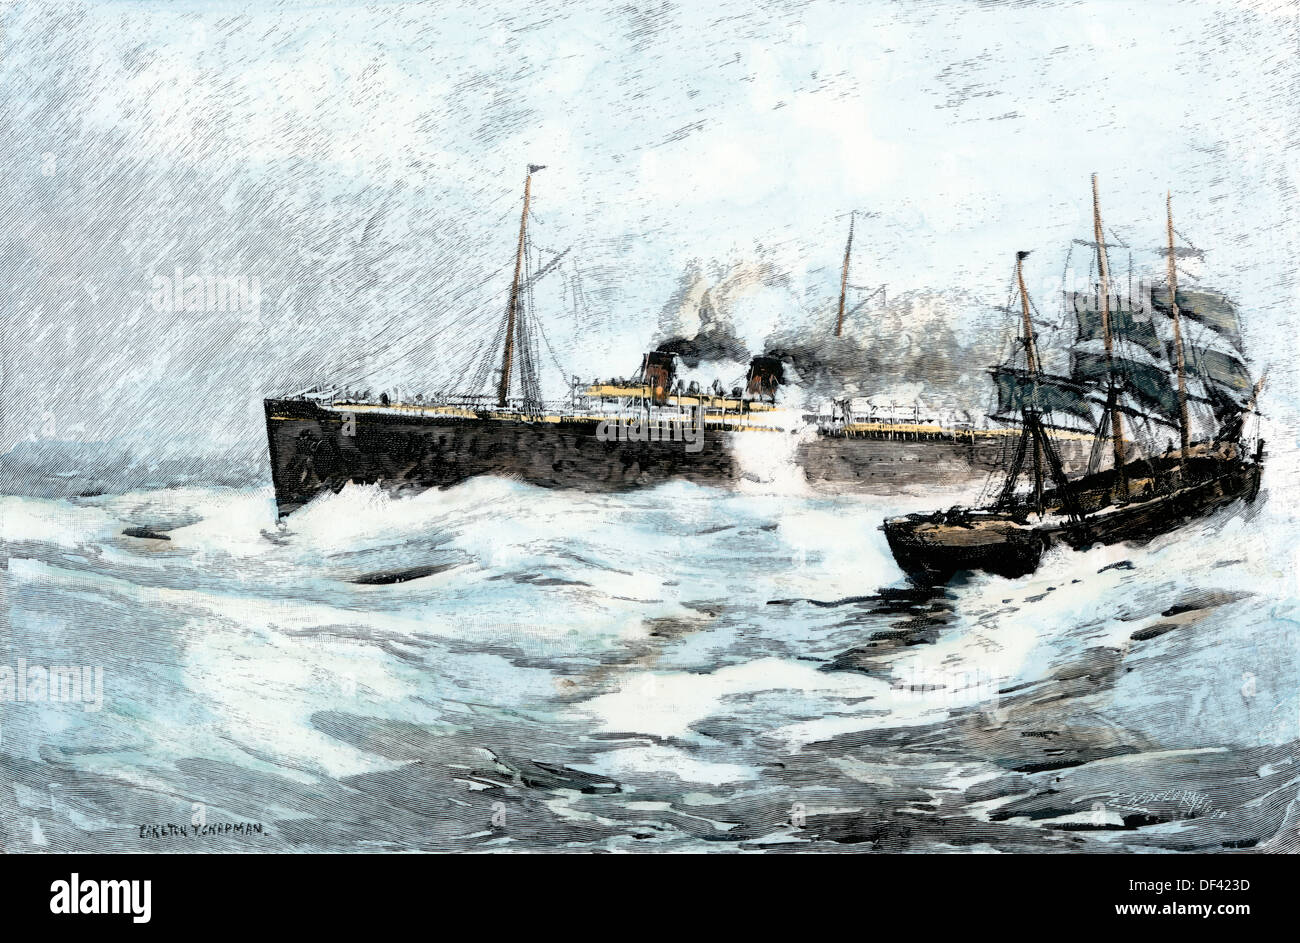 White Star passenger steamer 'Majestic' on a voyage, 1890s. Hand-colored woodcut Stock Photo